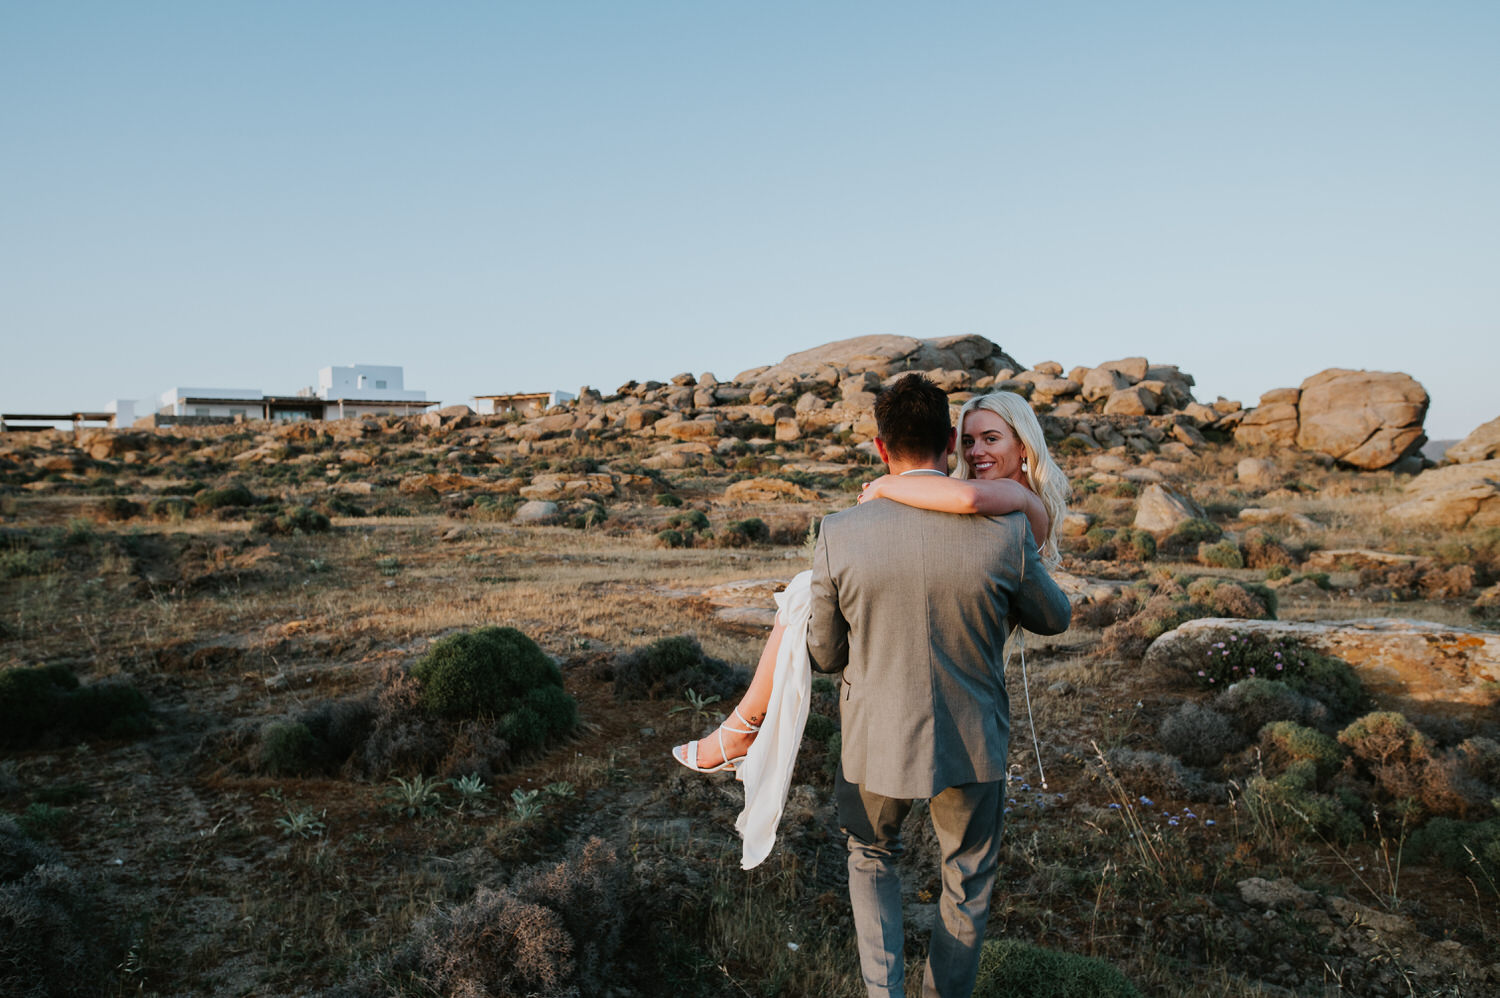 Mykonos wedding photographer: groom holding his bride in his arms walking through grassy field towards the massive rocks in sunset light.